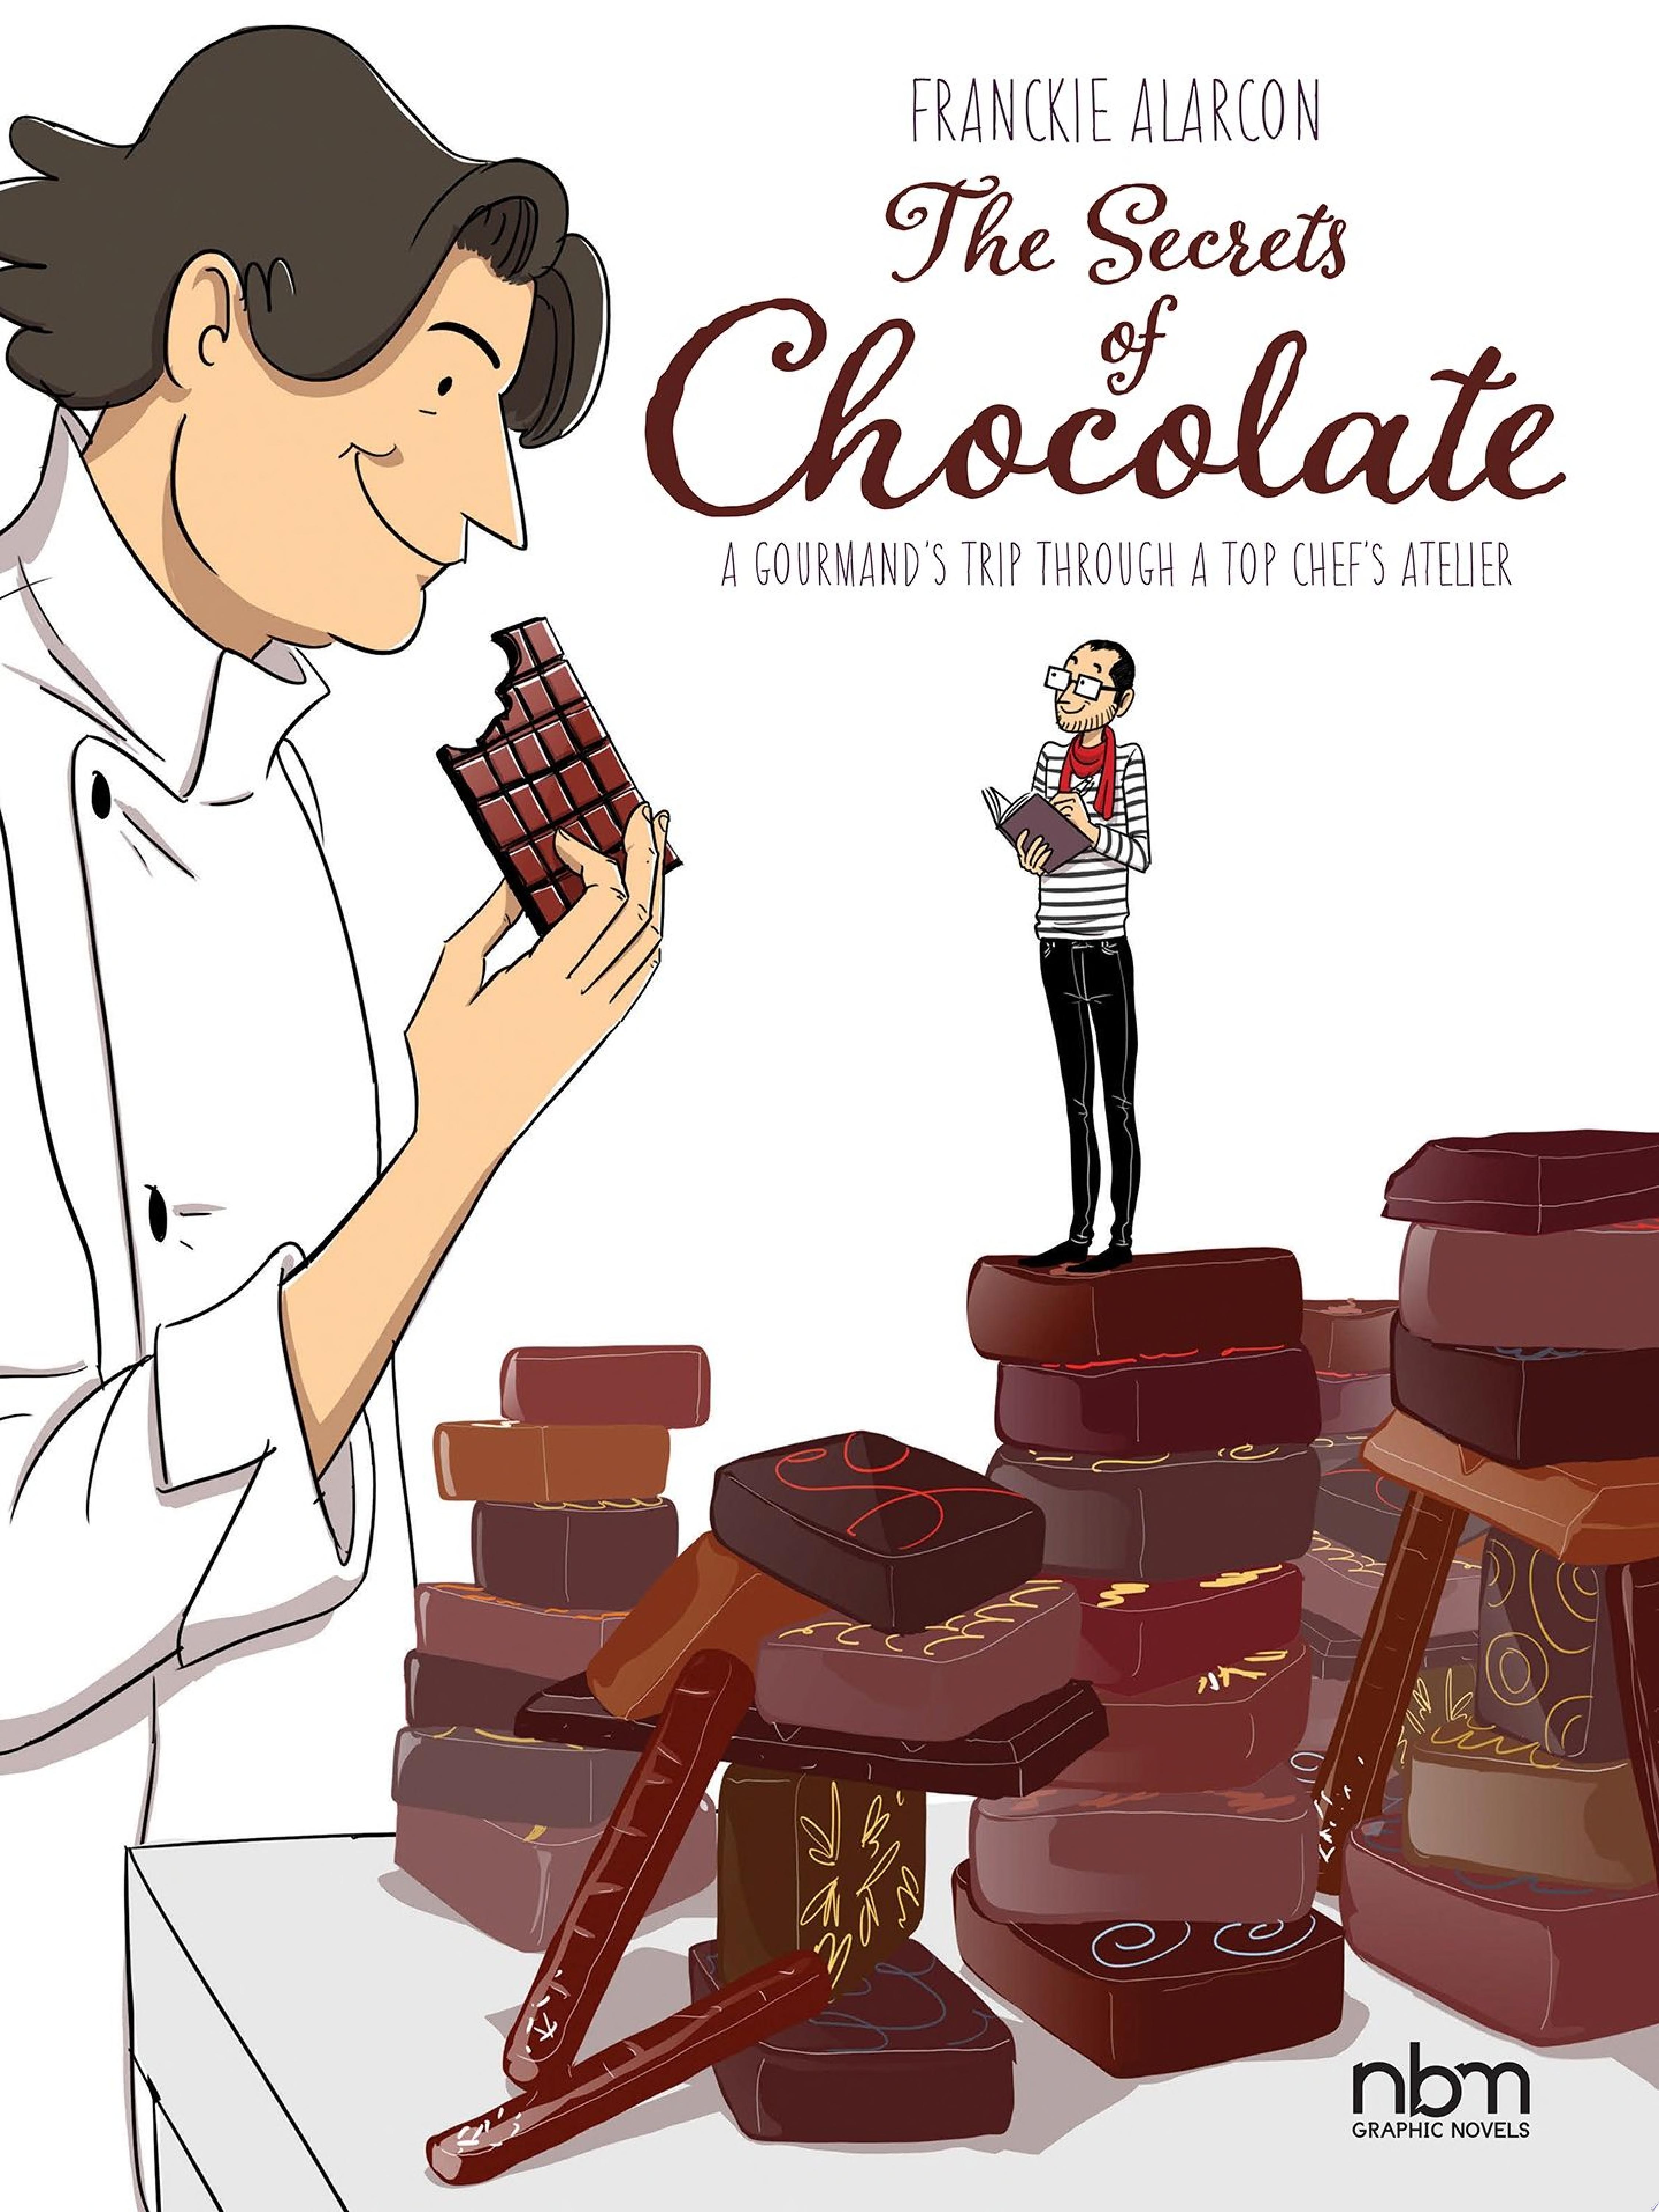 Image for "The Secrets of Chocolate"